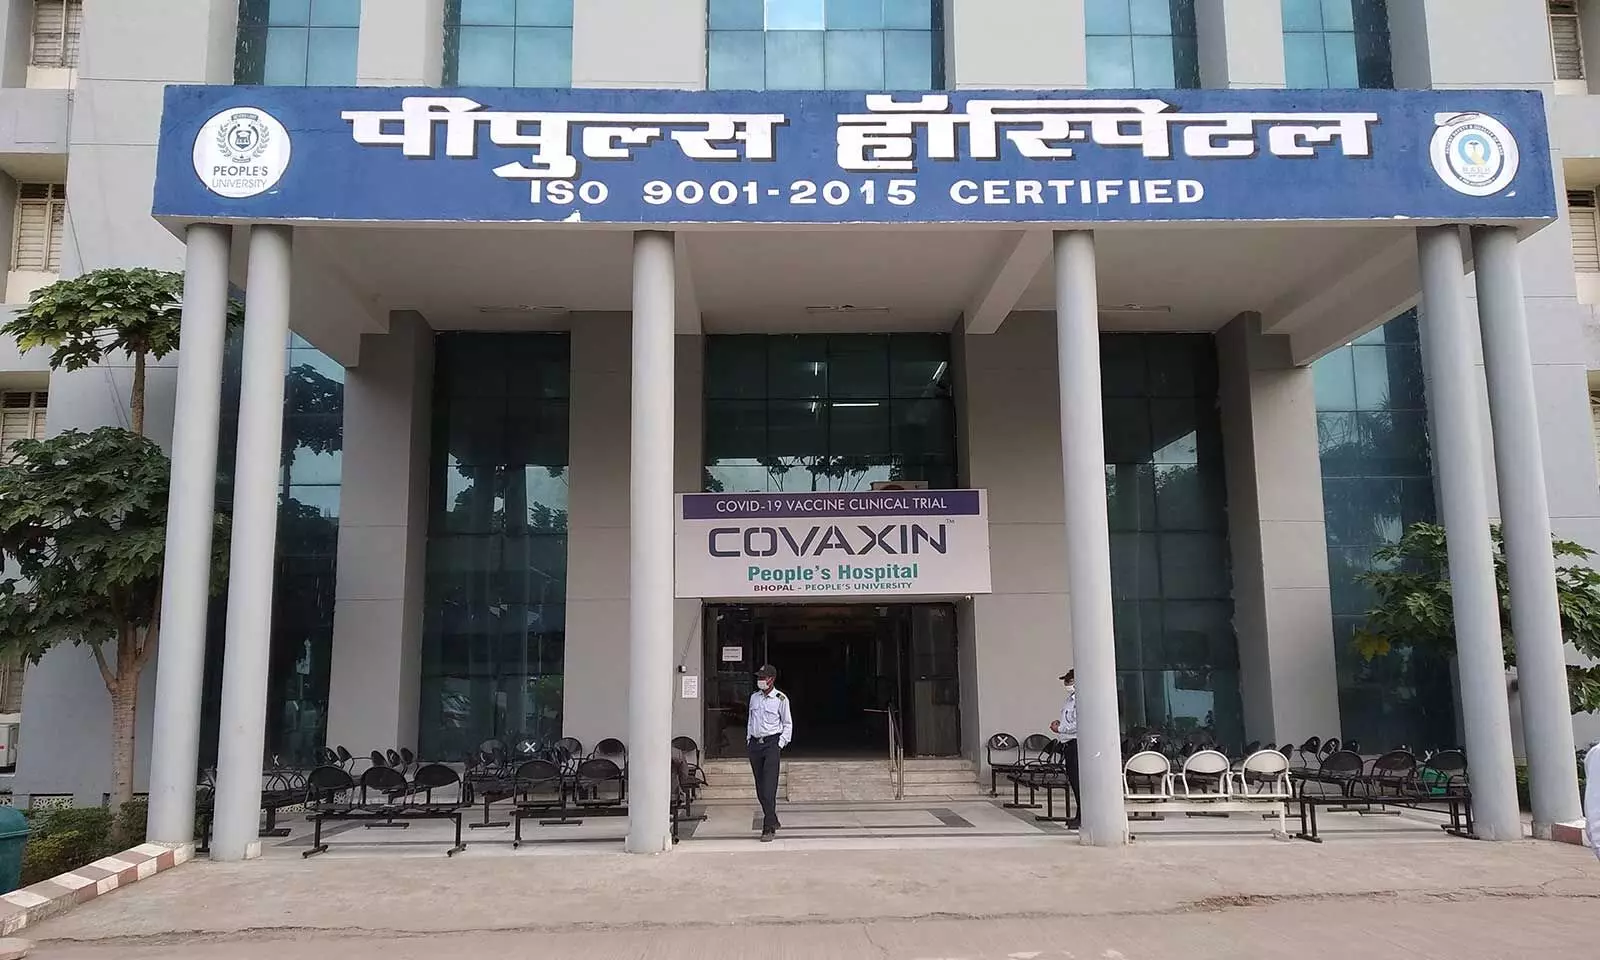 Covaxin clinical trial centre - People’s University Hospital, Bhopal